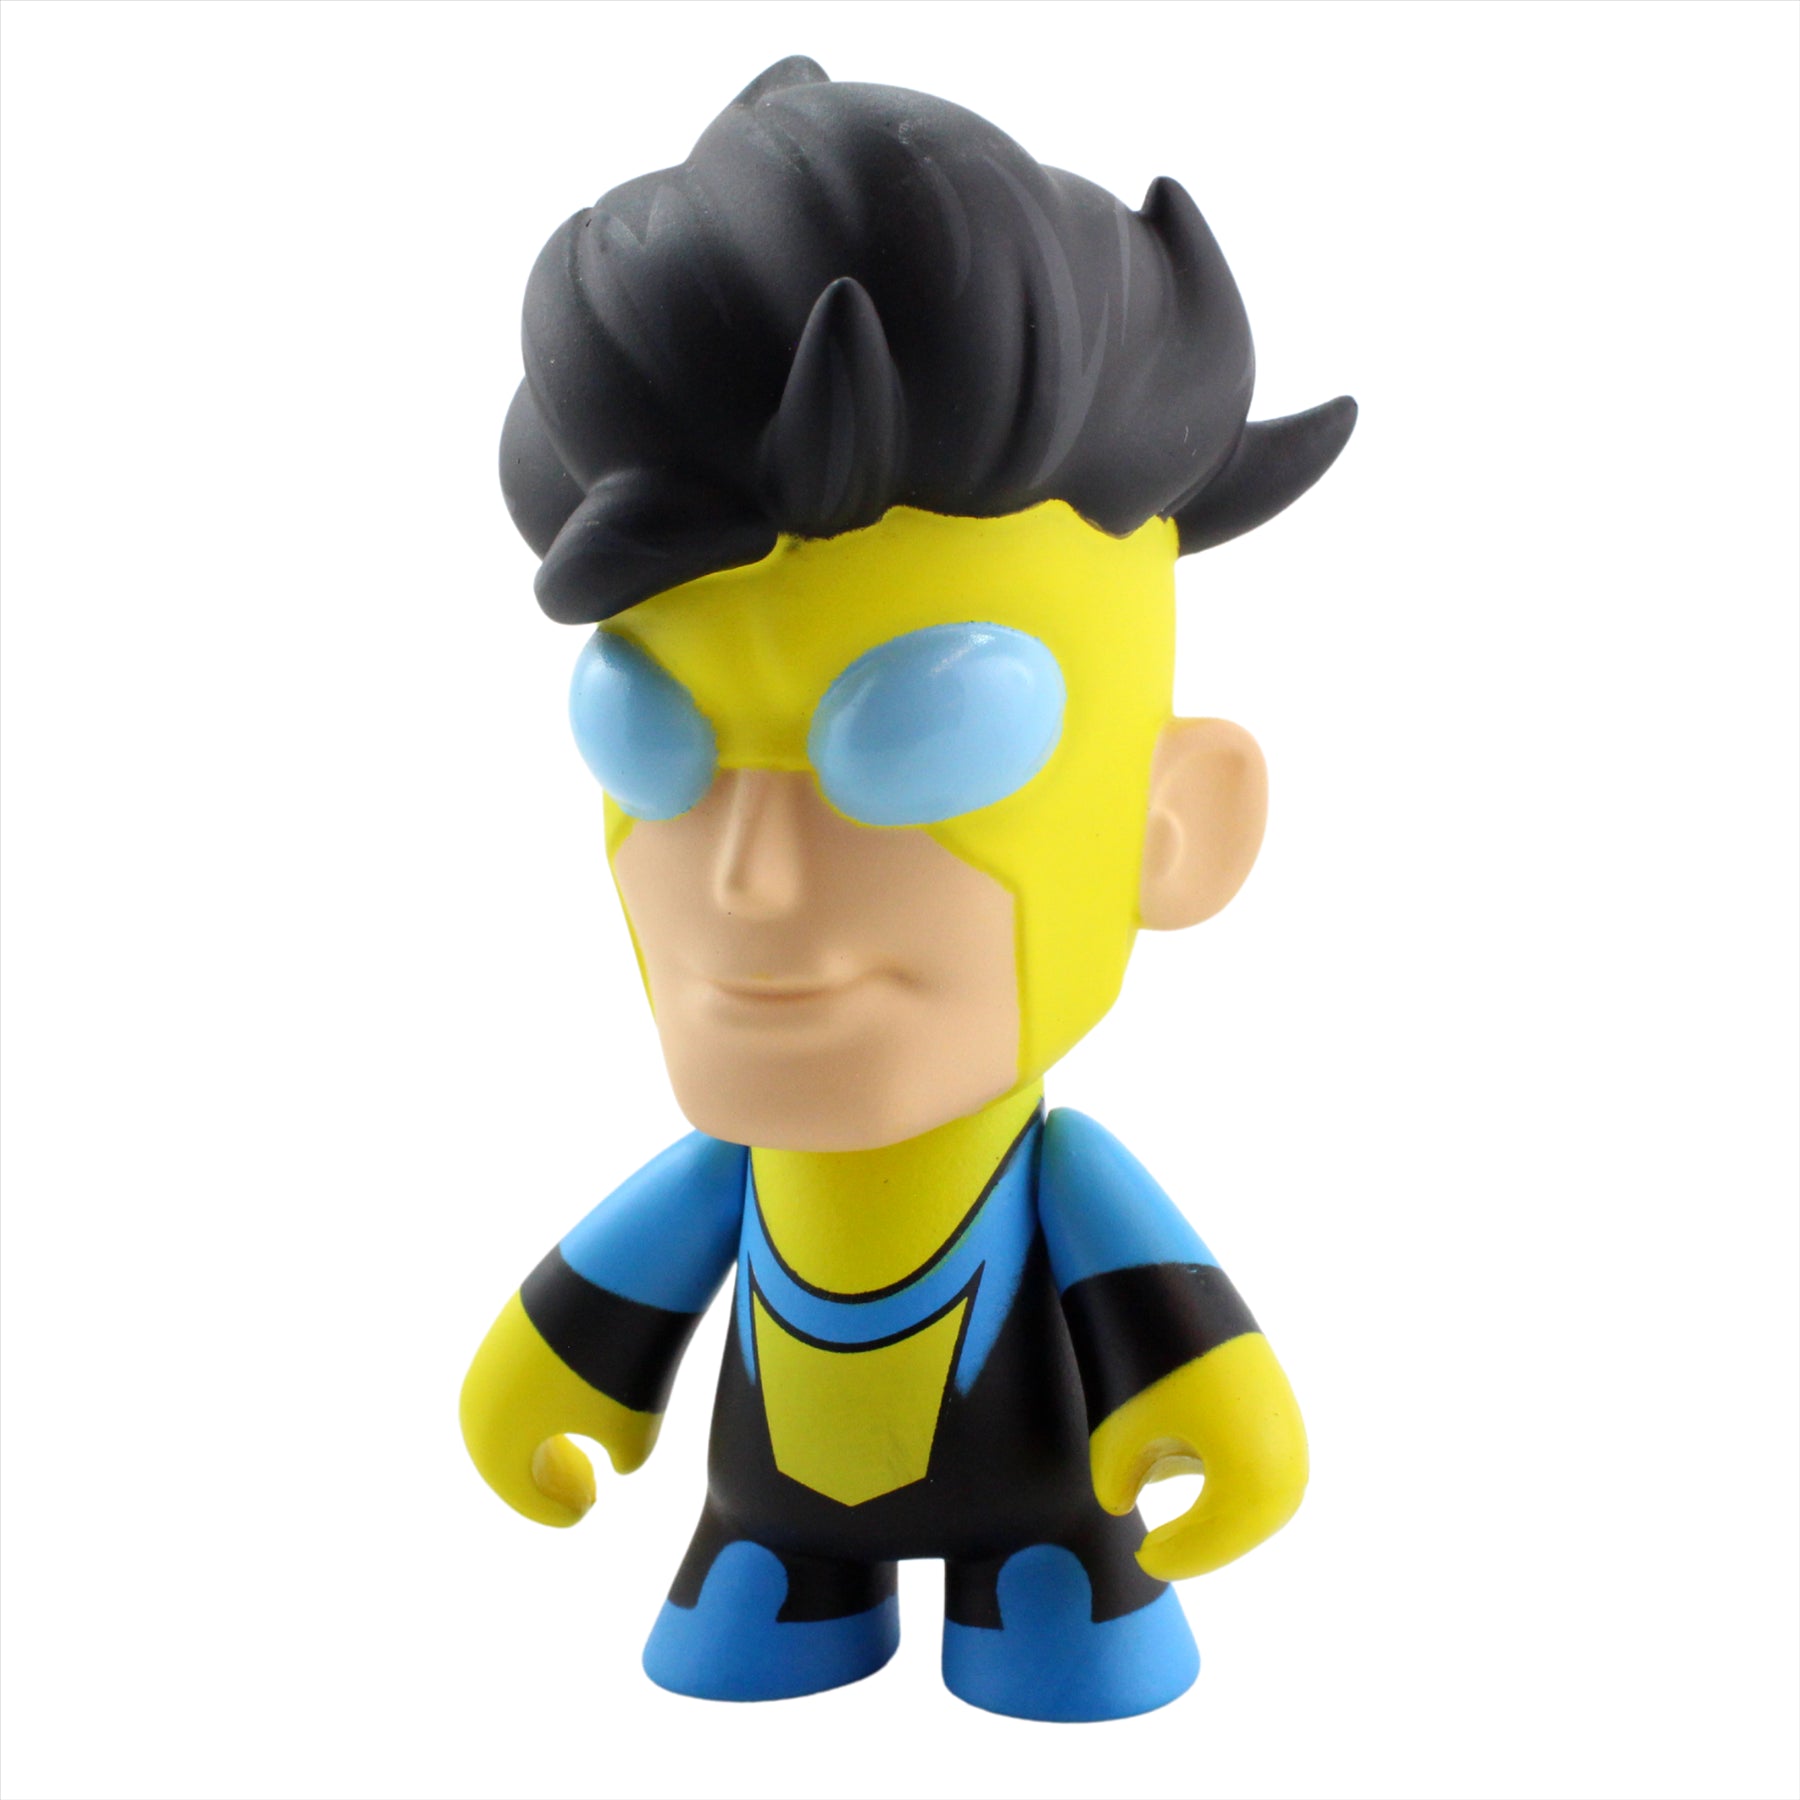 Skybound Minis Series 1 - Invincible 3" 8cm Articulated Collectible Figure - Toptoys2u